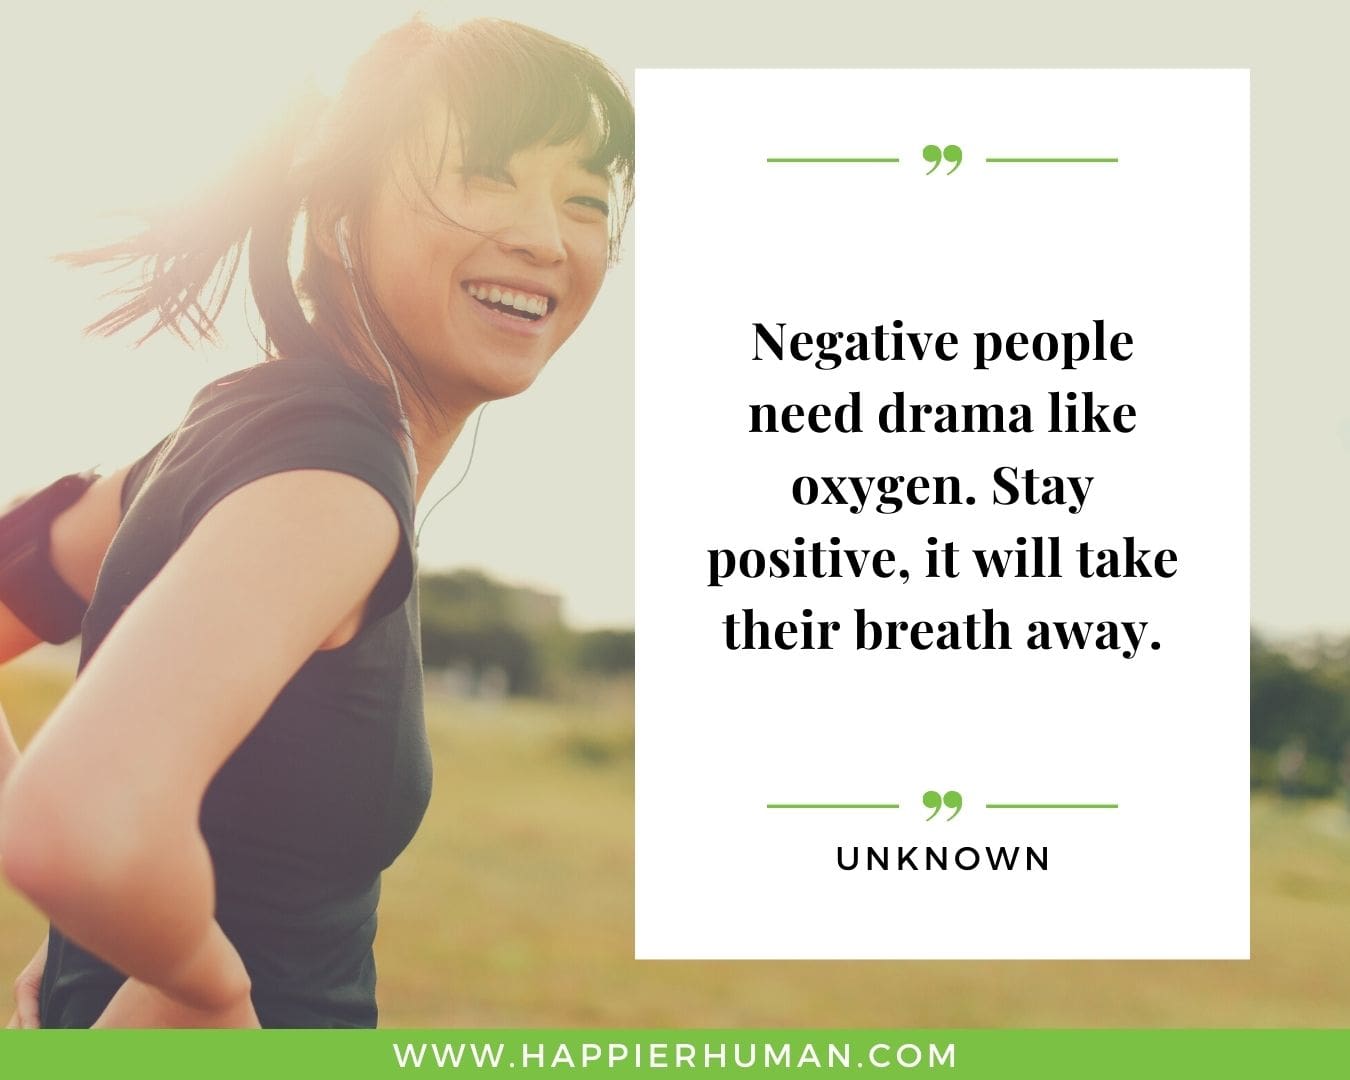 Toxic People Quotes - “Negative people need drama like oxygen. Stay positive, it will take their breath away.” – Unknown